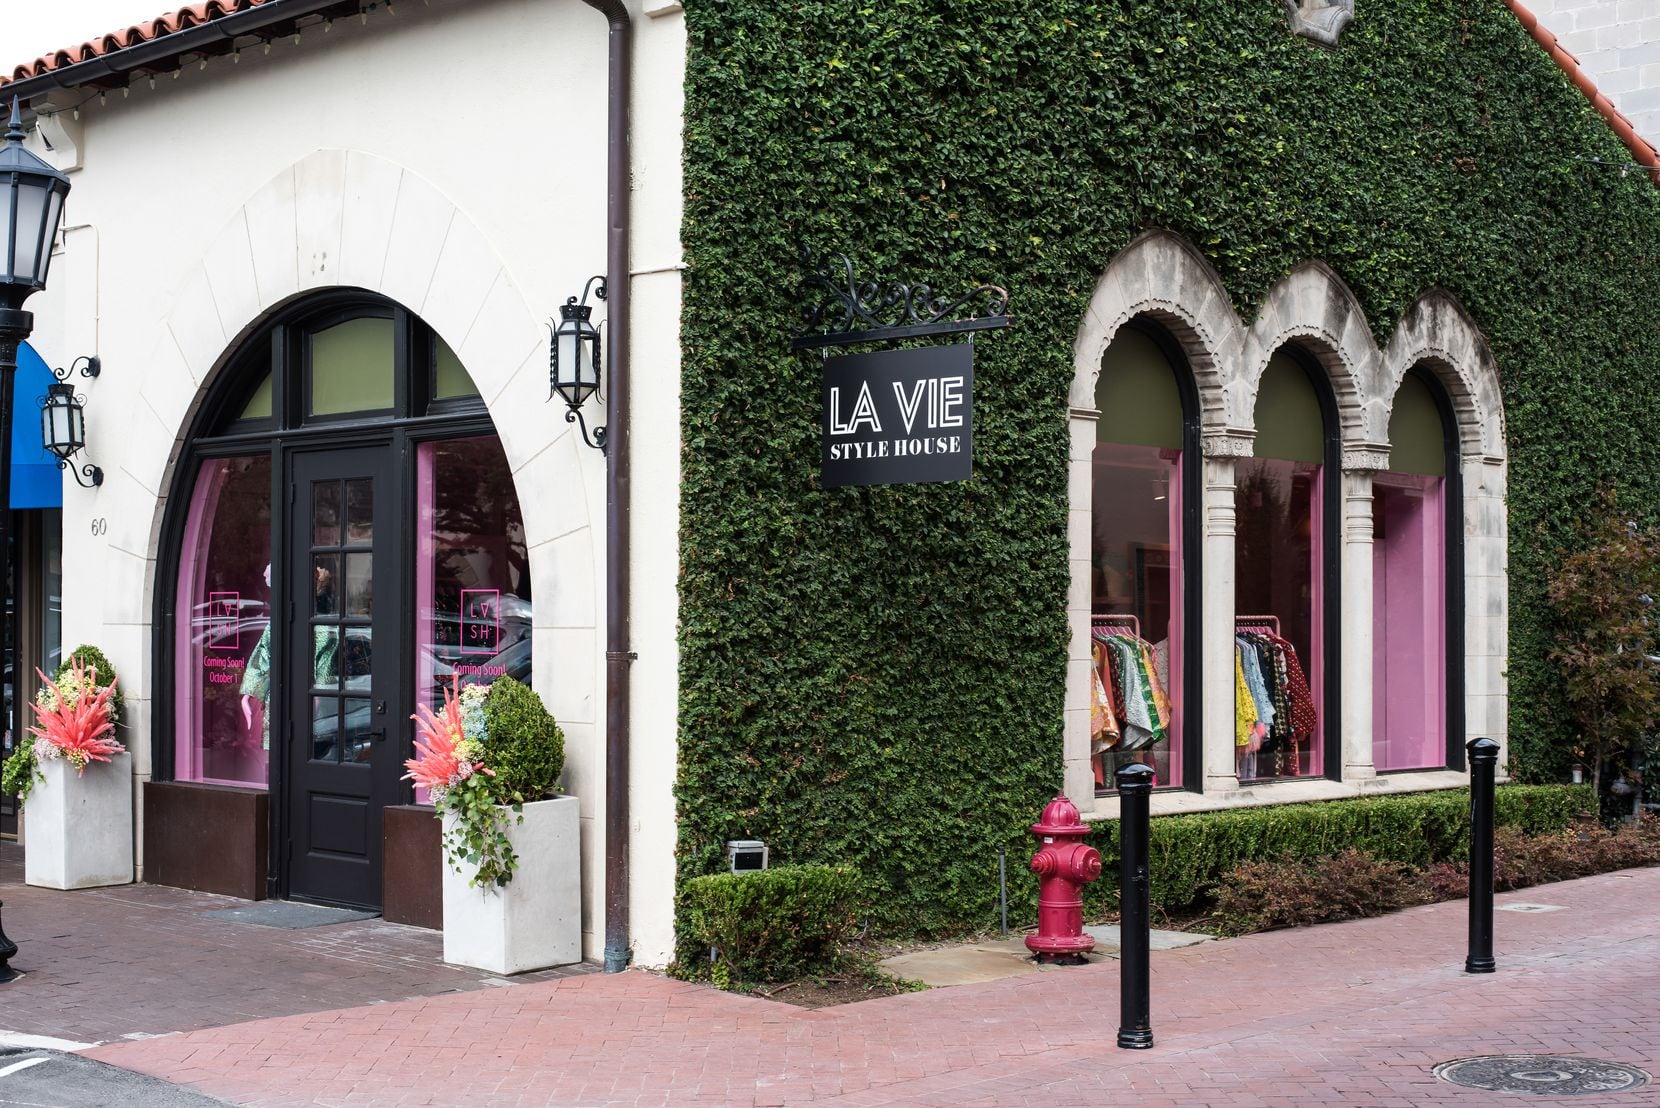 La Vie Style House in Highland Park Village is owned and operated by Jamie Coulter and Lindsey McClain, two self-described moms who met in a pilates class.